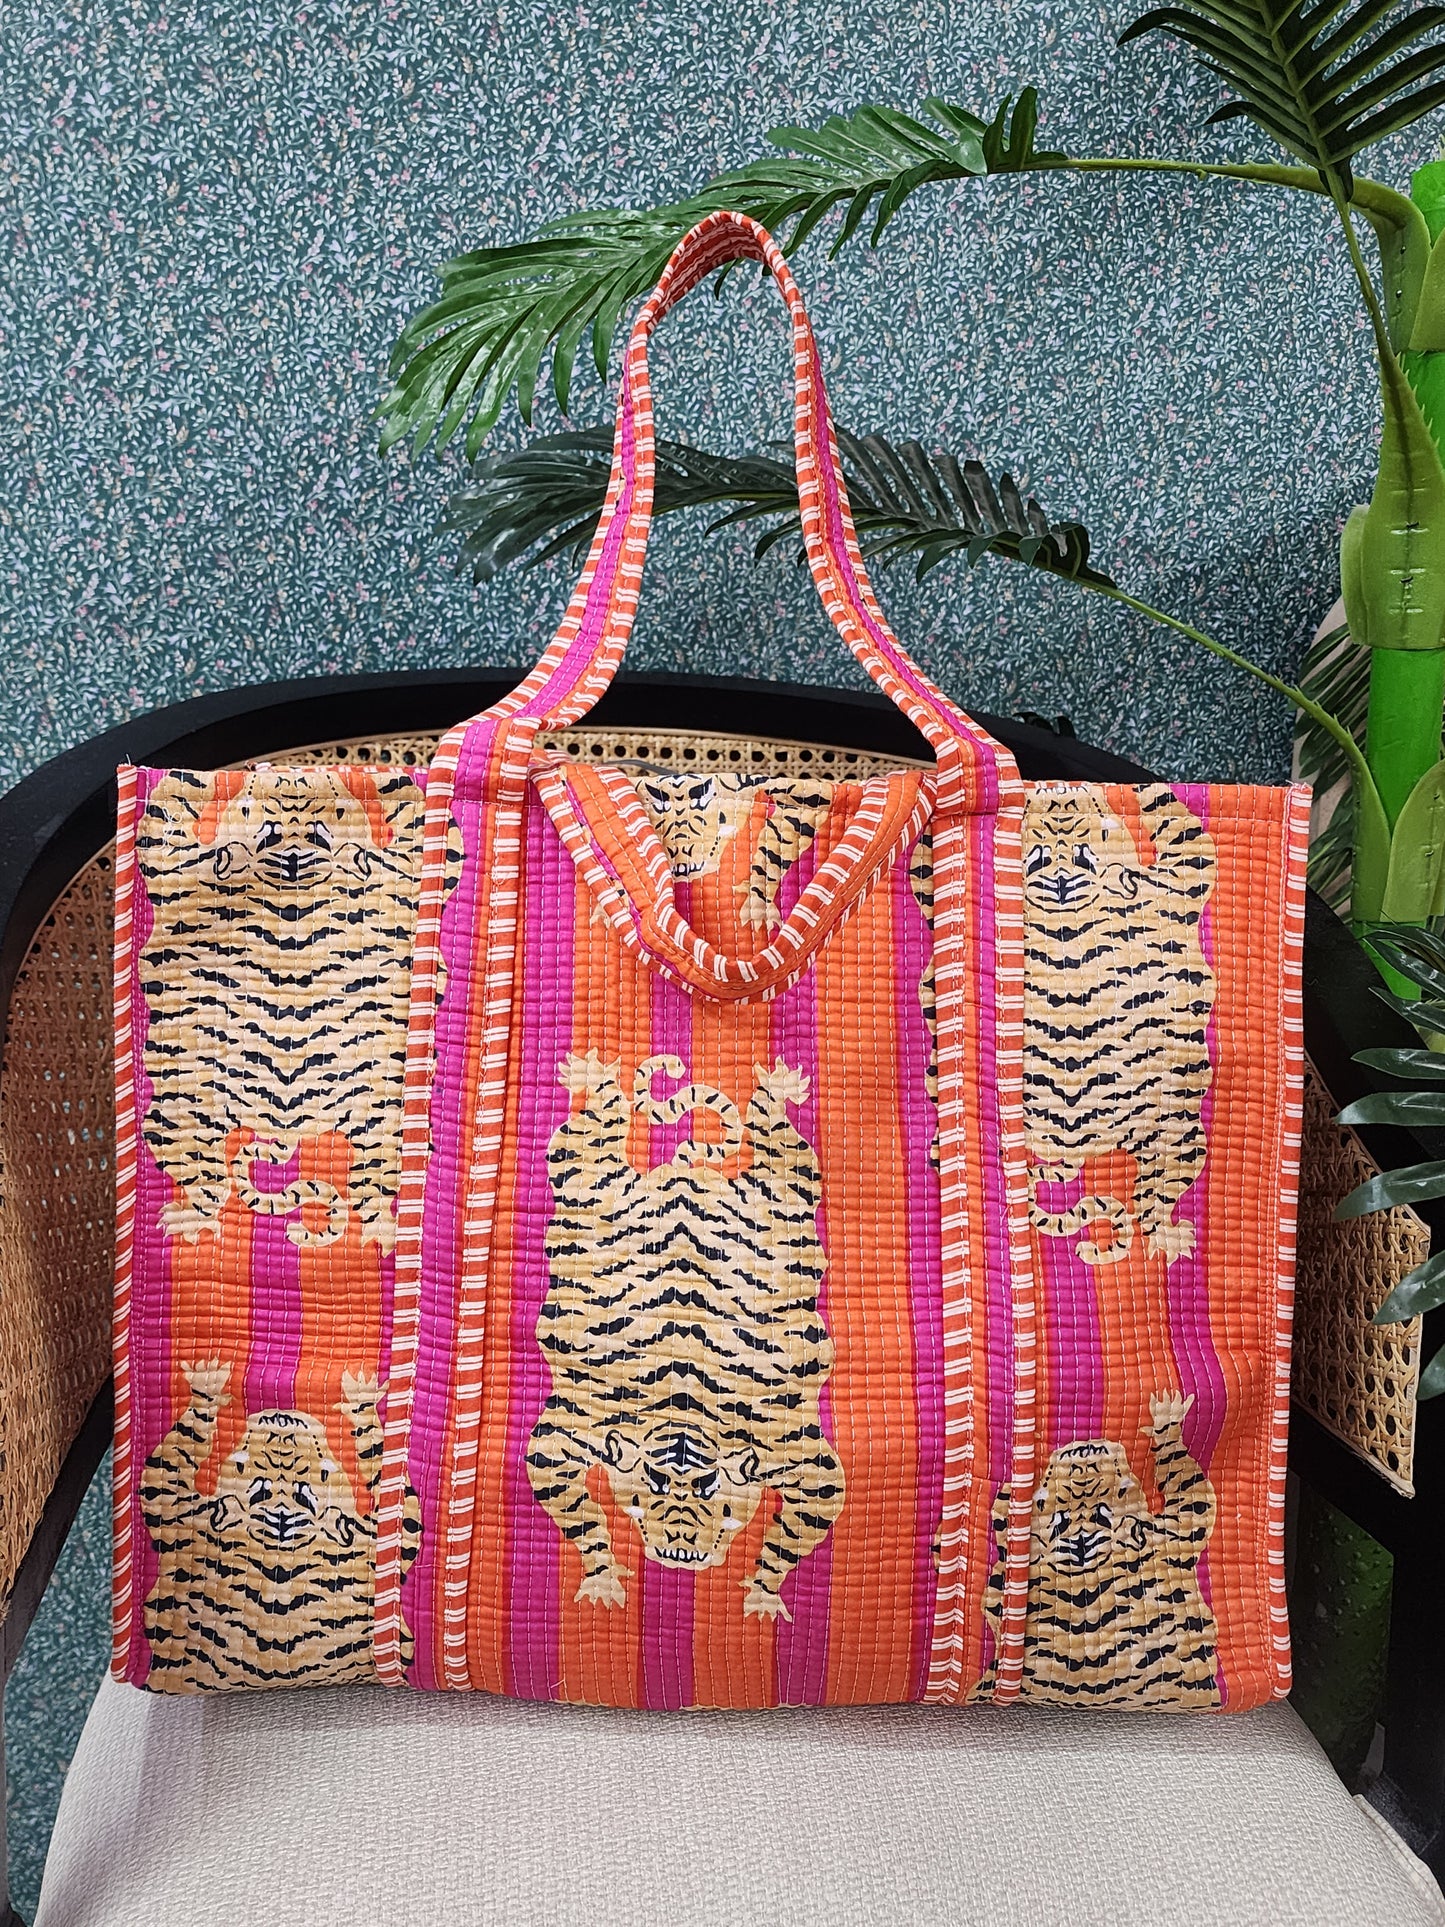 Handblock Printed Quilted Tote Bag without zip/button 17x18x 6 inches